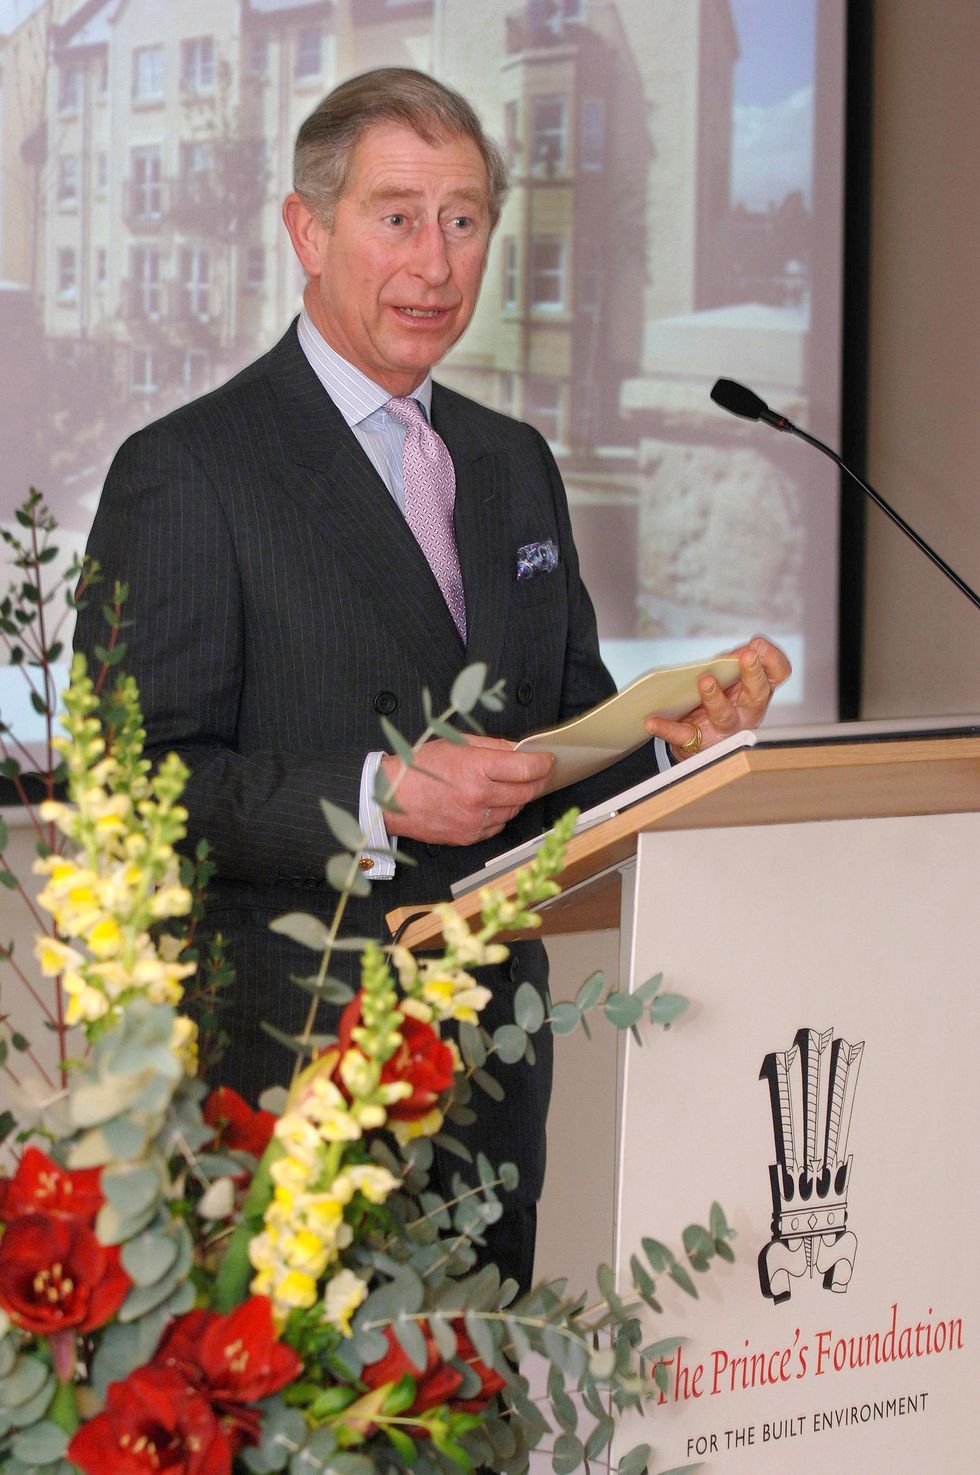 prince charles attends the prince's foundation reception february 1, 2007